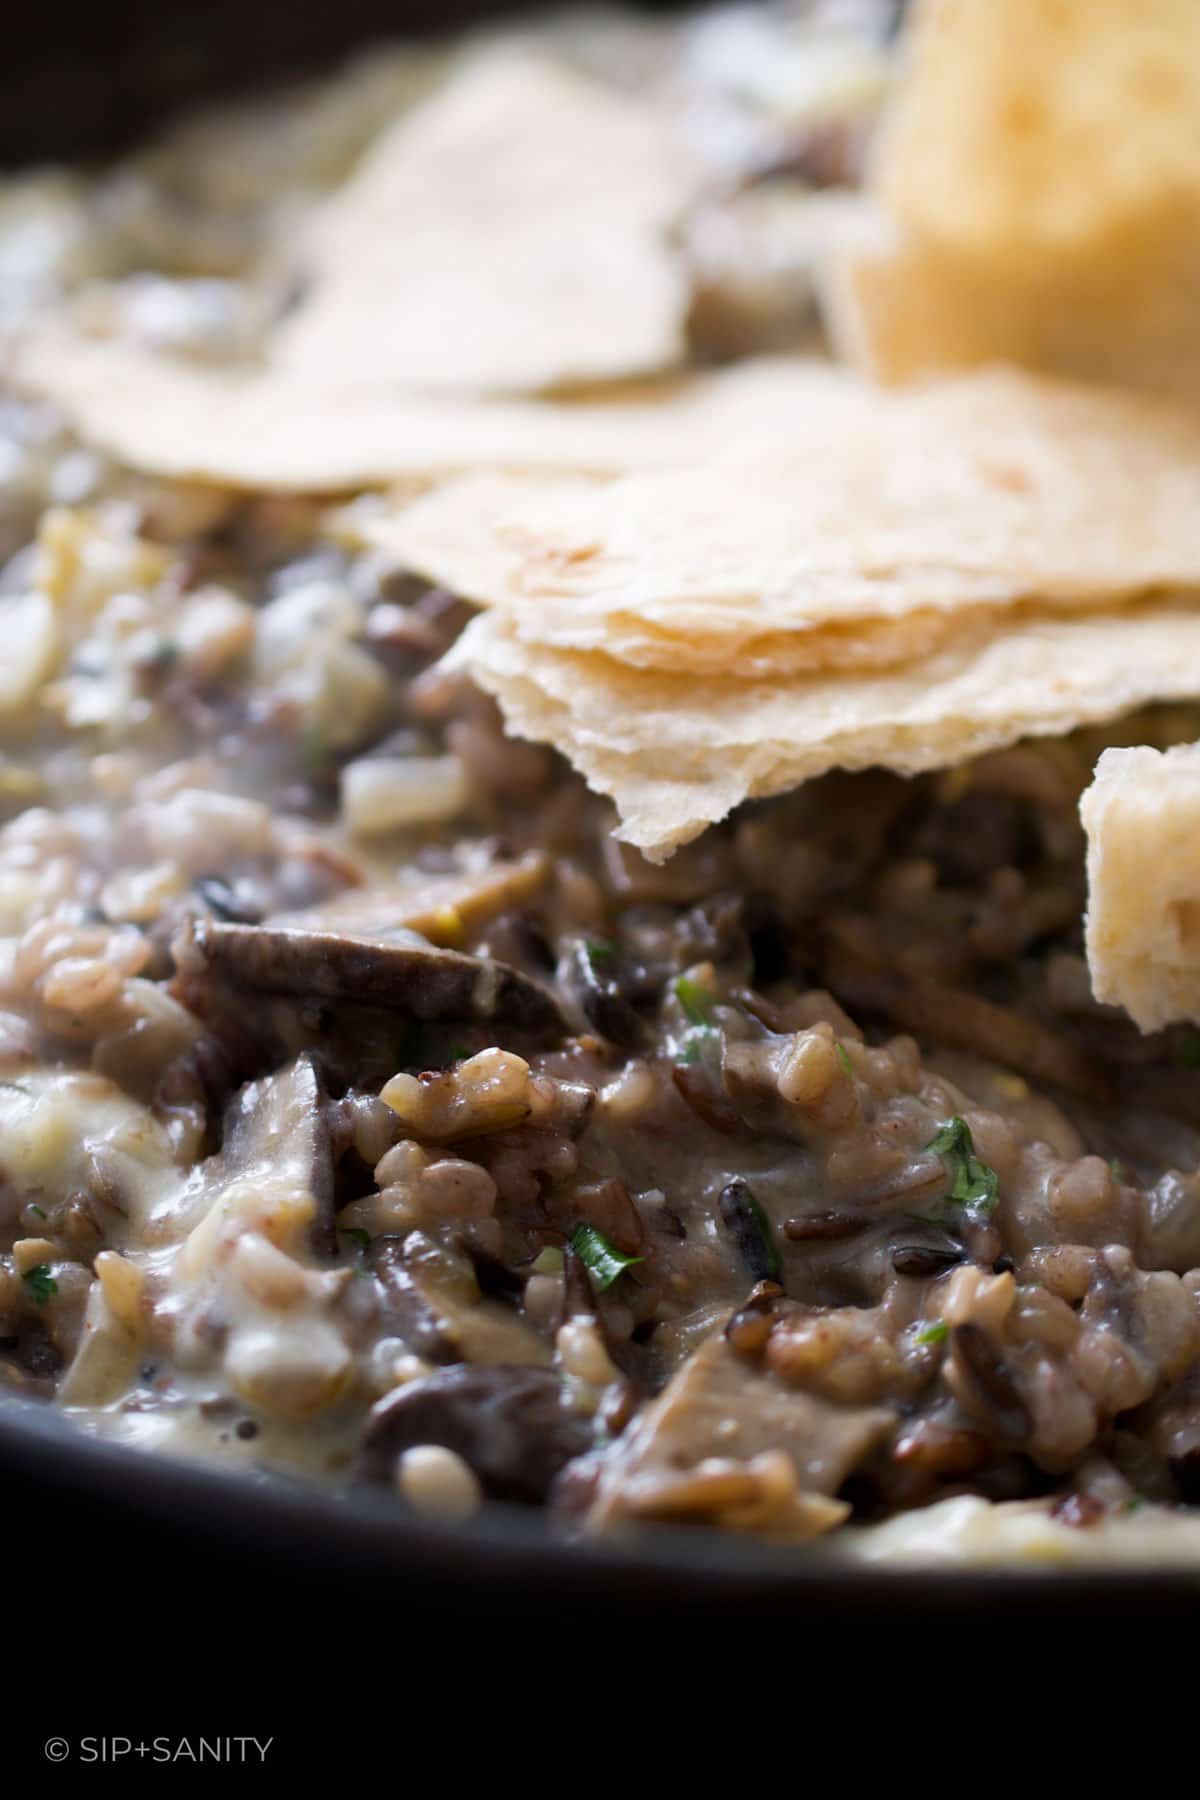 Torn whole wheat tortillas being added to a skillet of rice and mushrooms.